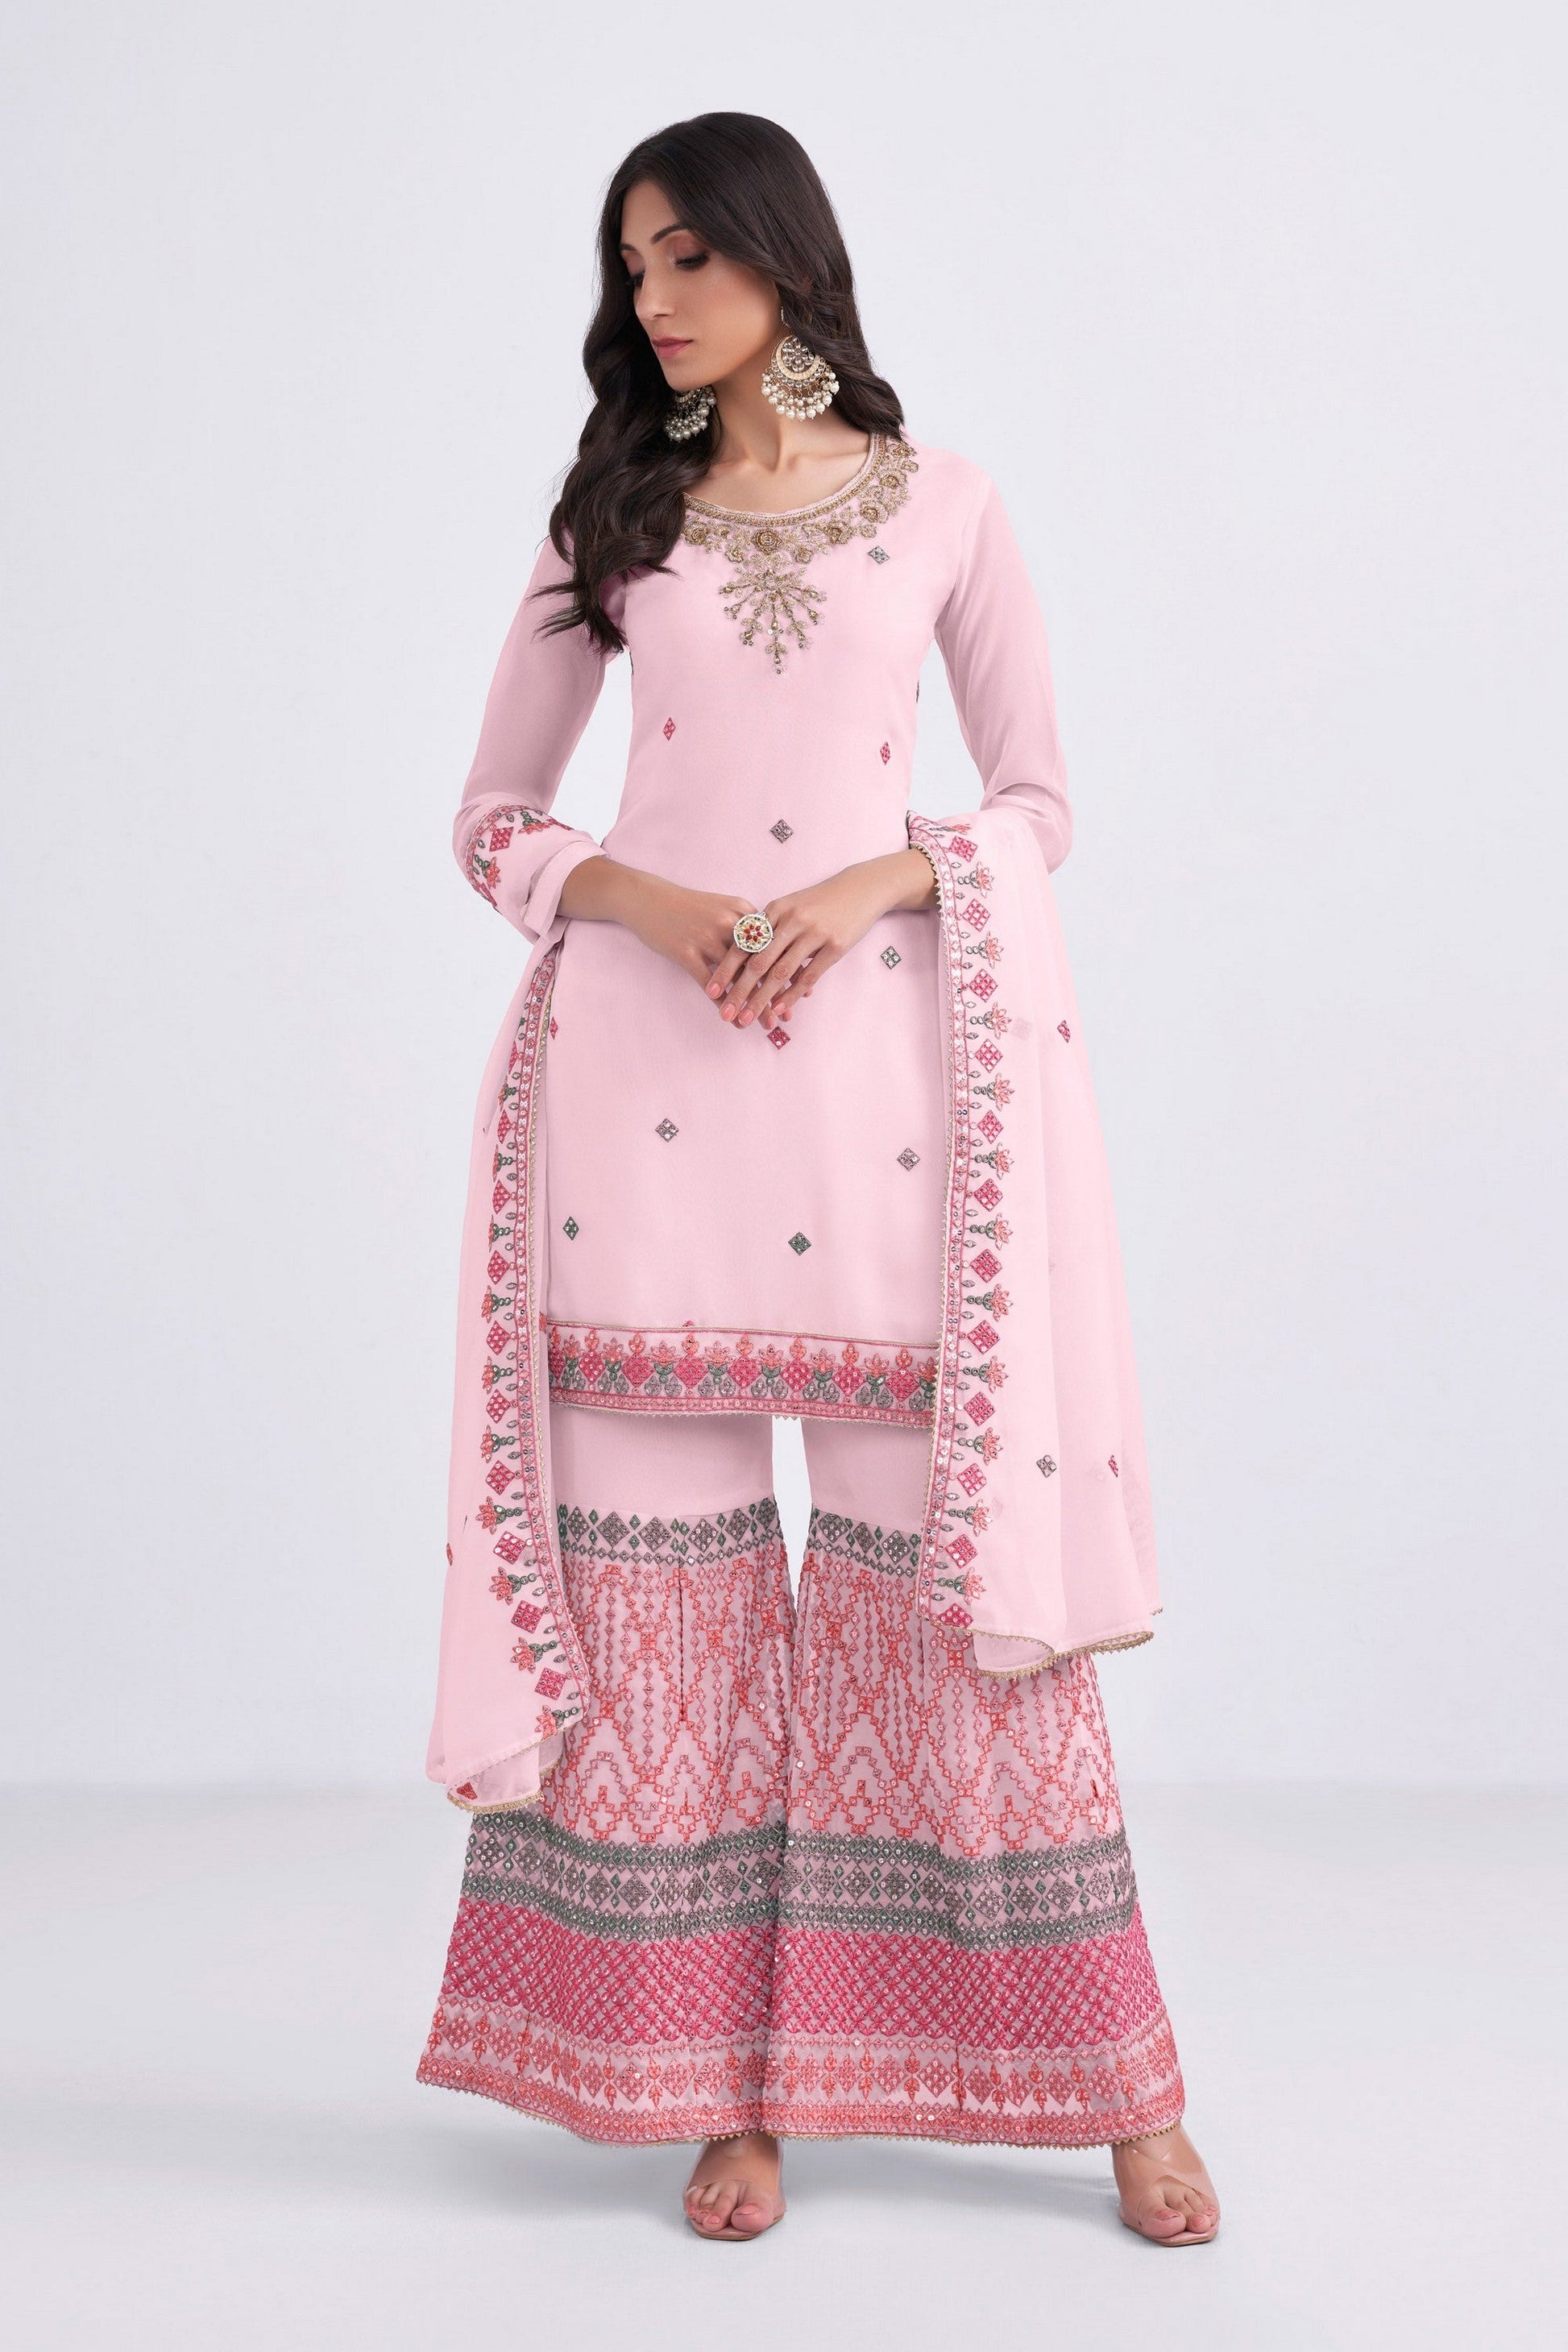 Light Pink Pakistani Georgette Sharara For Indian Festivals & Weddings - Sequence Embroidery Work, Thread Embroidery Work, Khatli Work, Zari Work